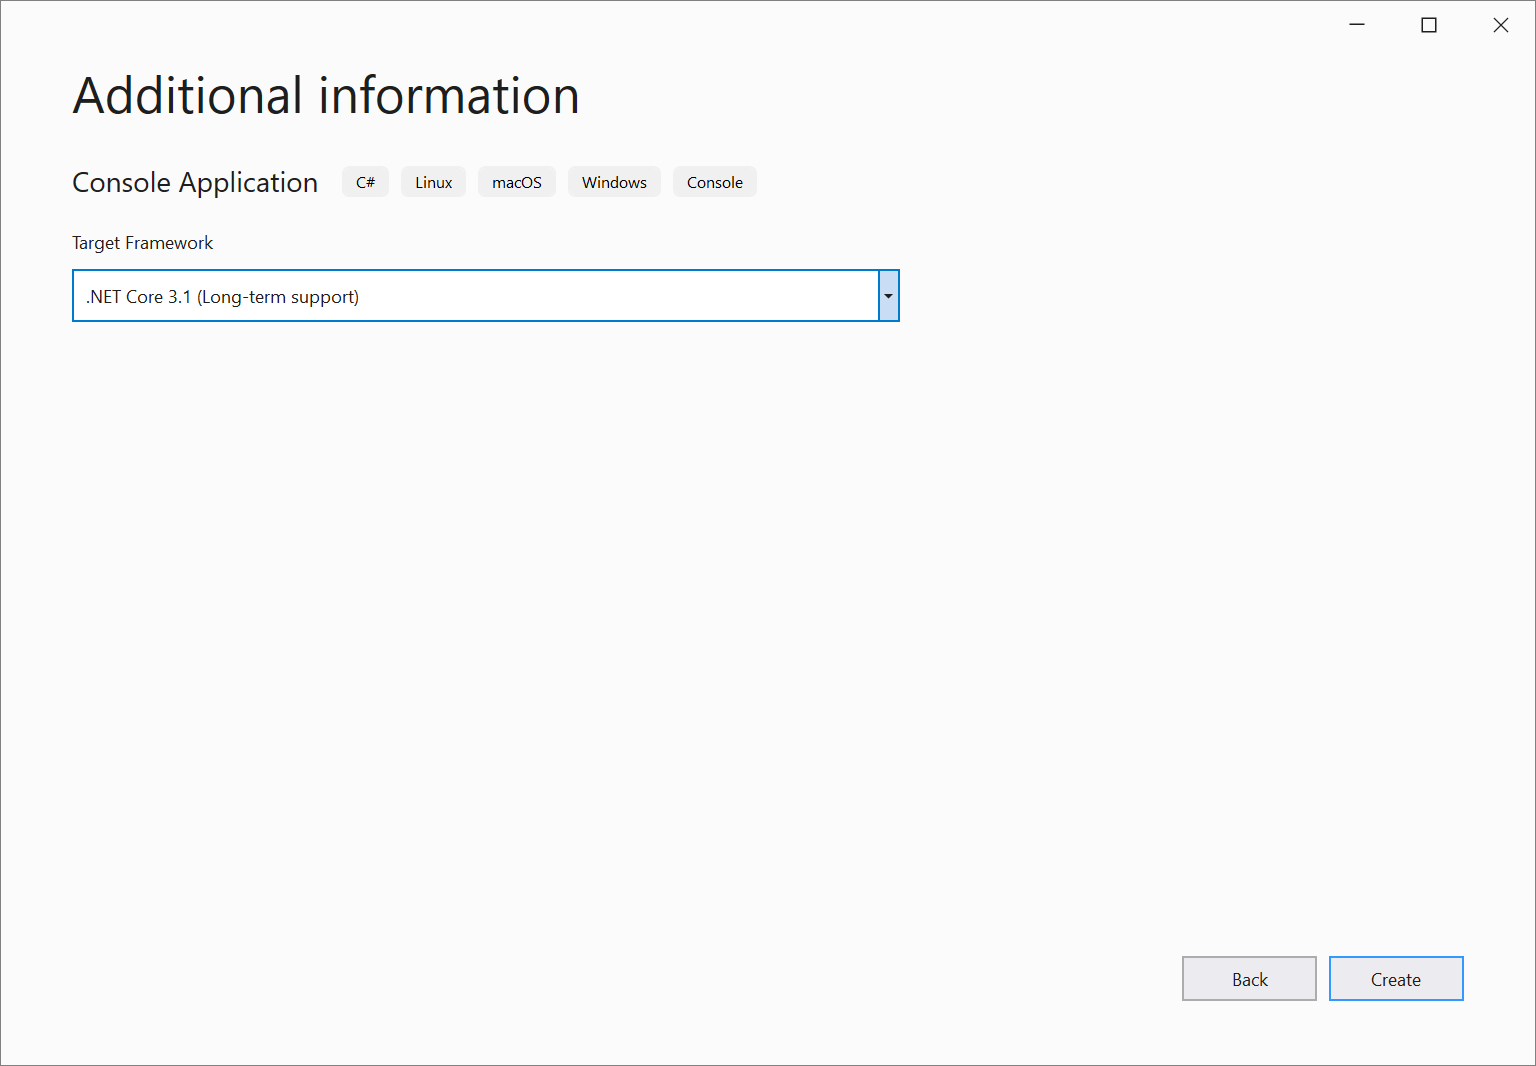 Screenshot of the 'Additional information' window in Visual Studio 2019, where you select the version of the .NET Core Framework that you want.